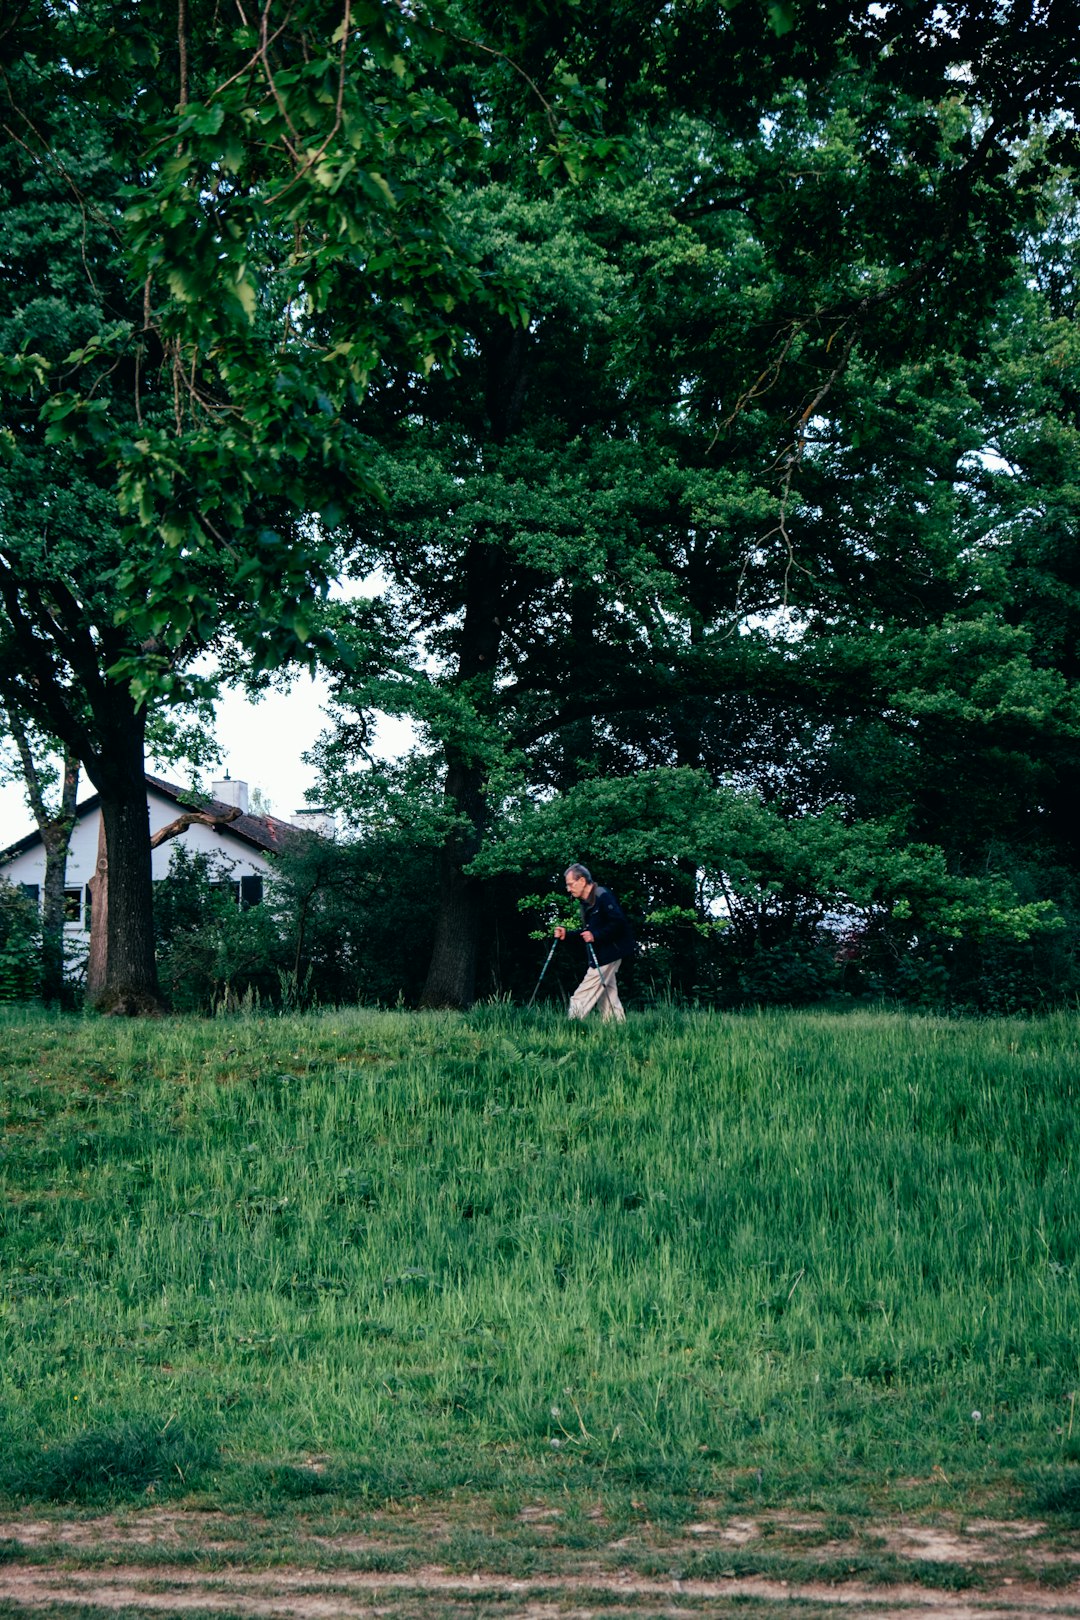 man and woman walking on green grass field surrounded by green trees during daytime